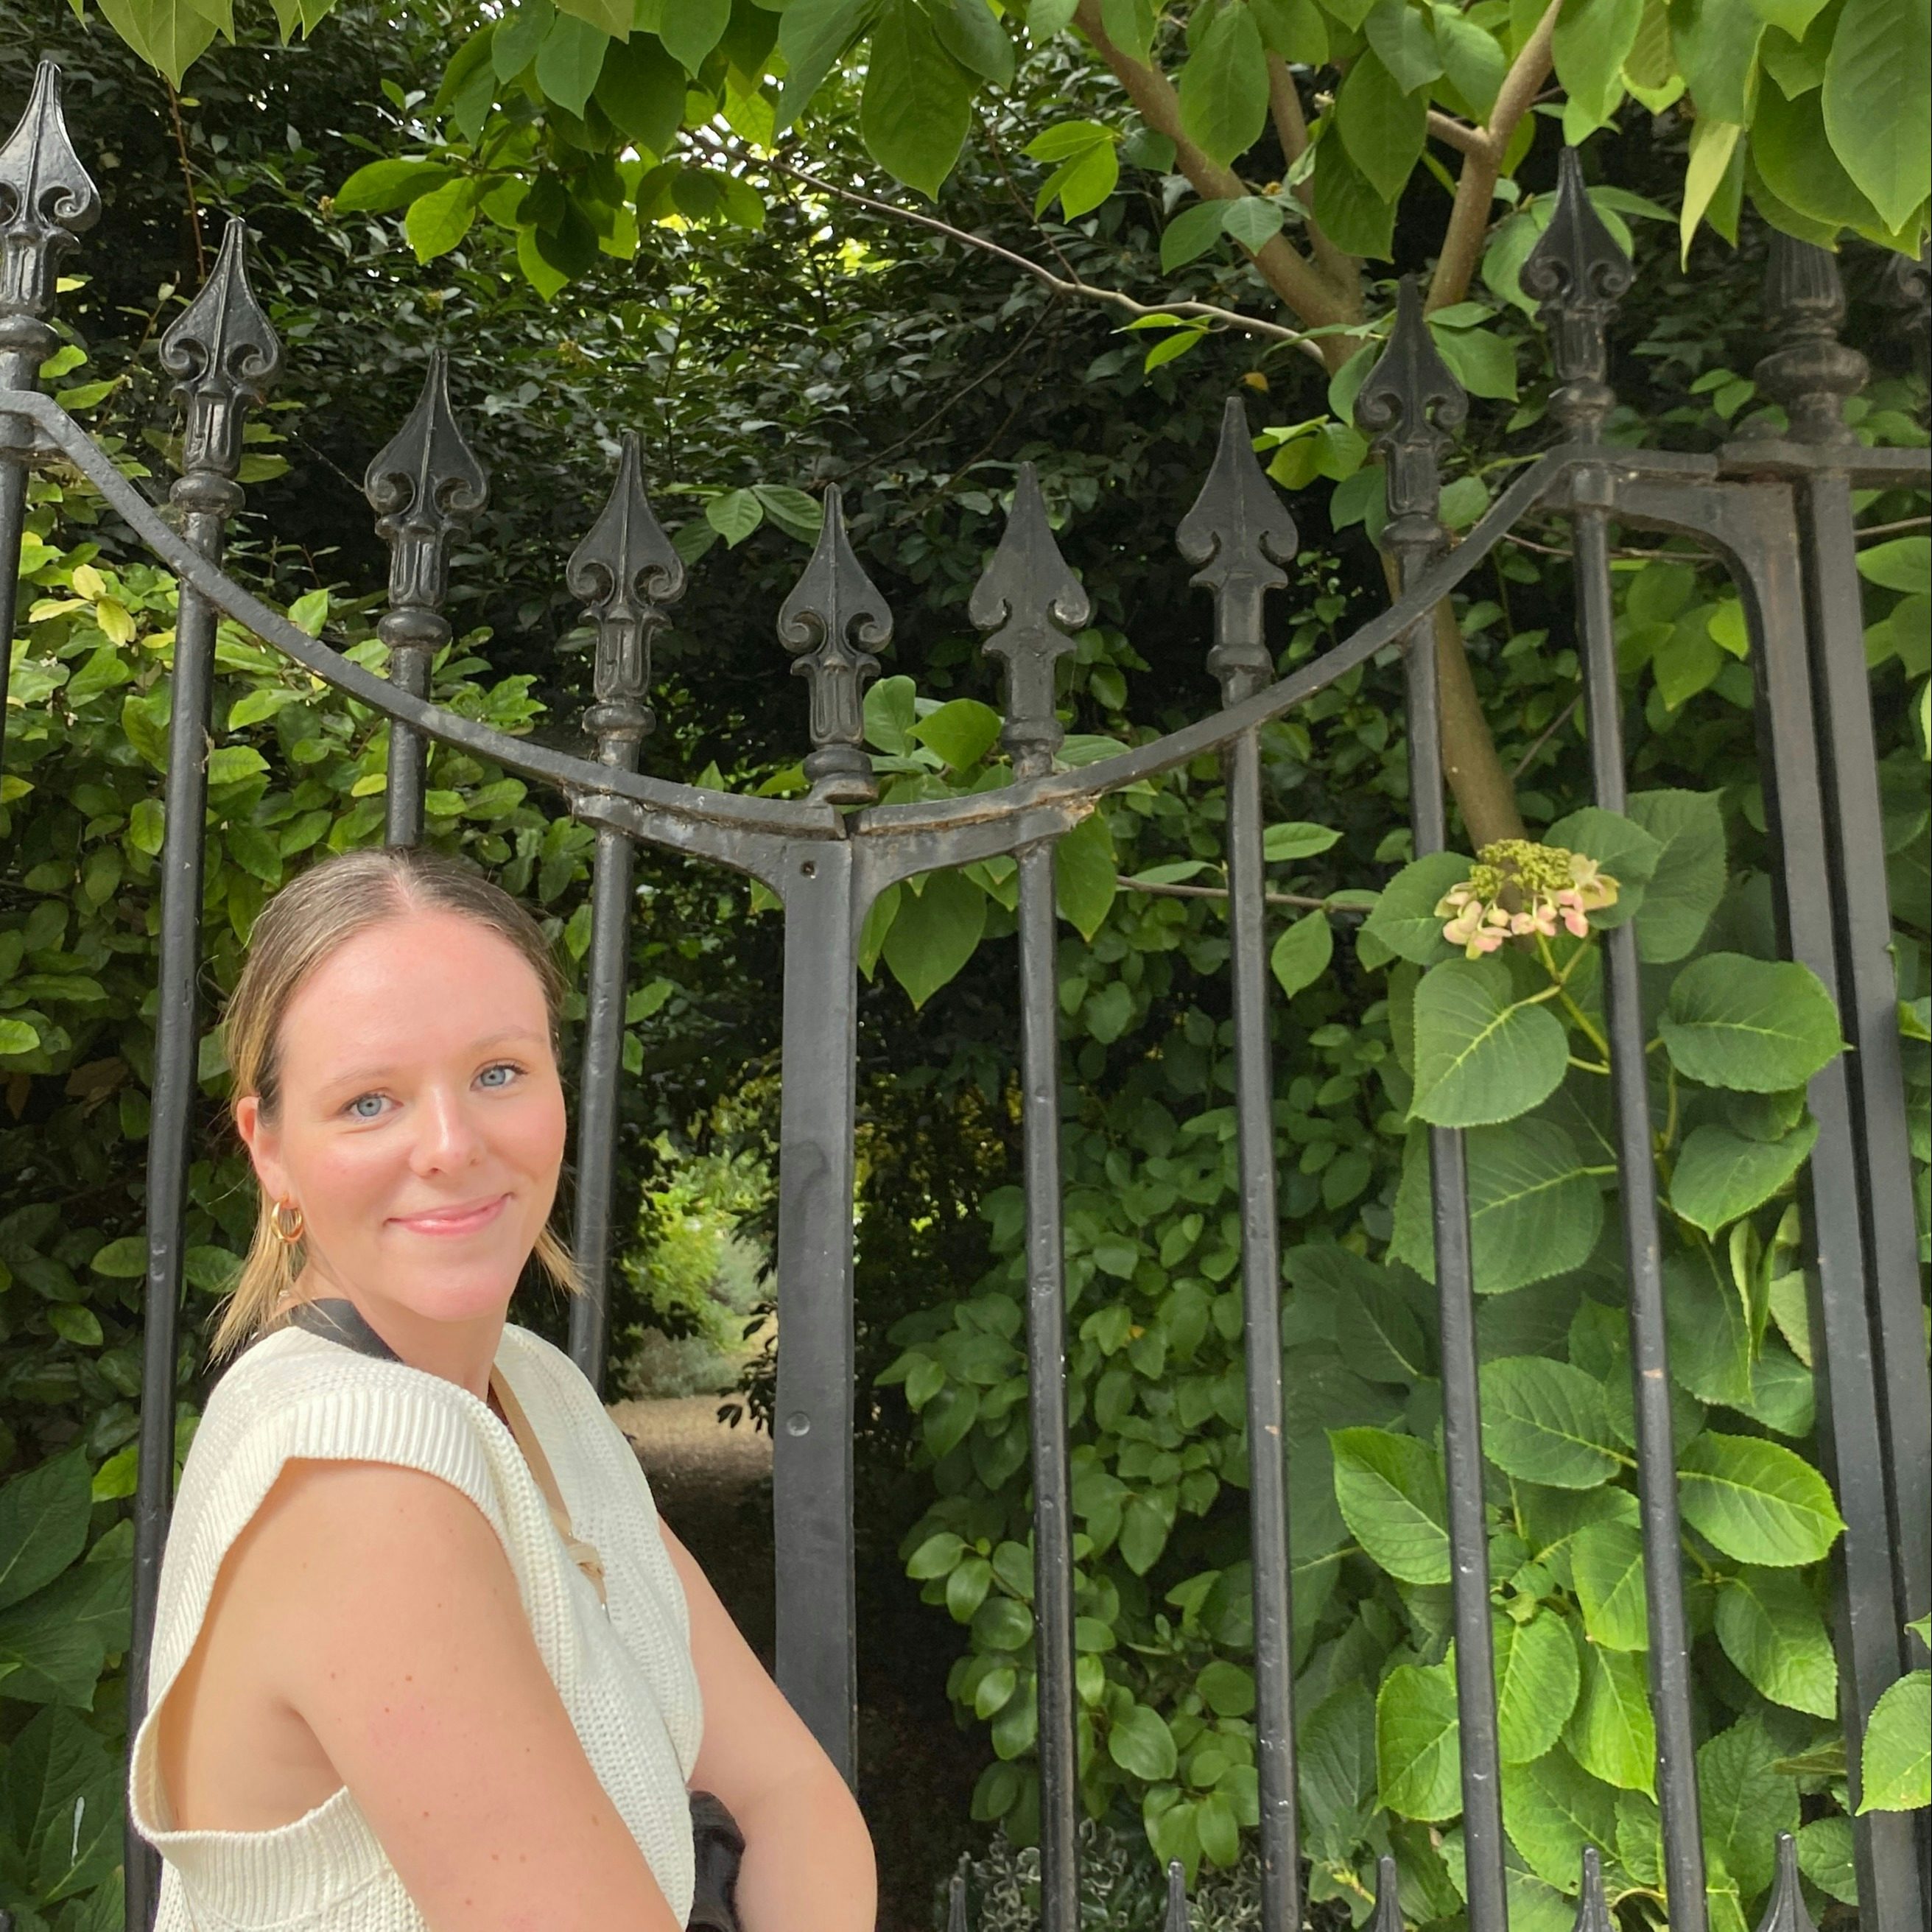 Travel Advisor Maggie Penn in a yellow shirt in front of green plants and an iron gate.